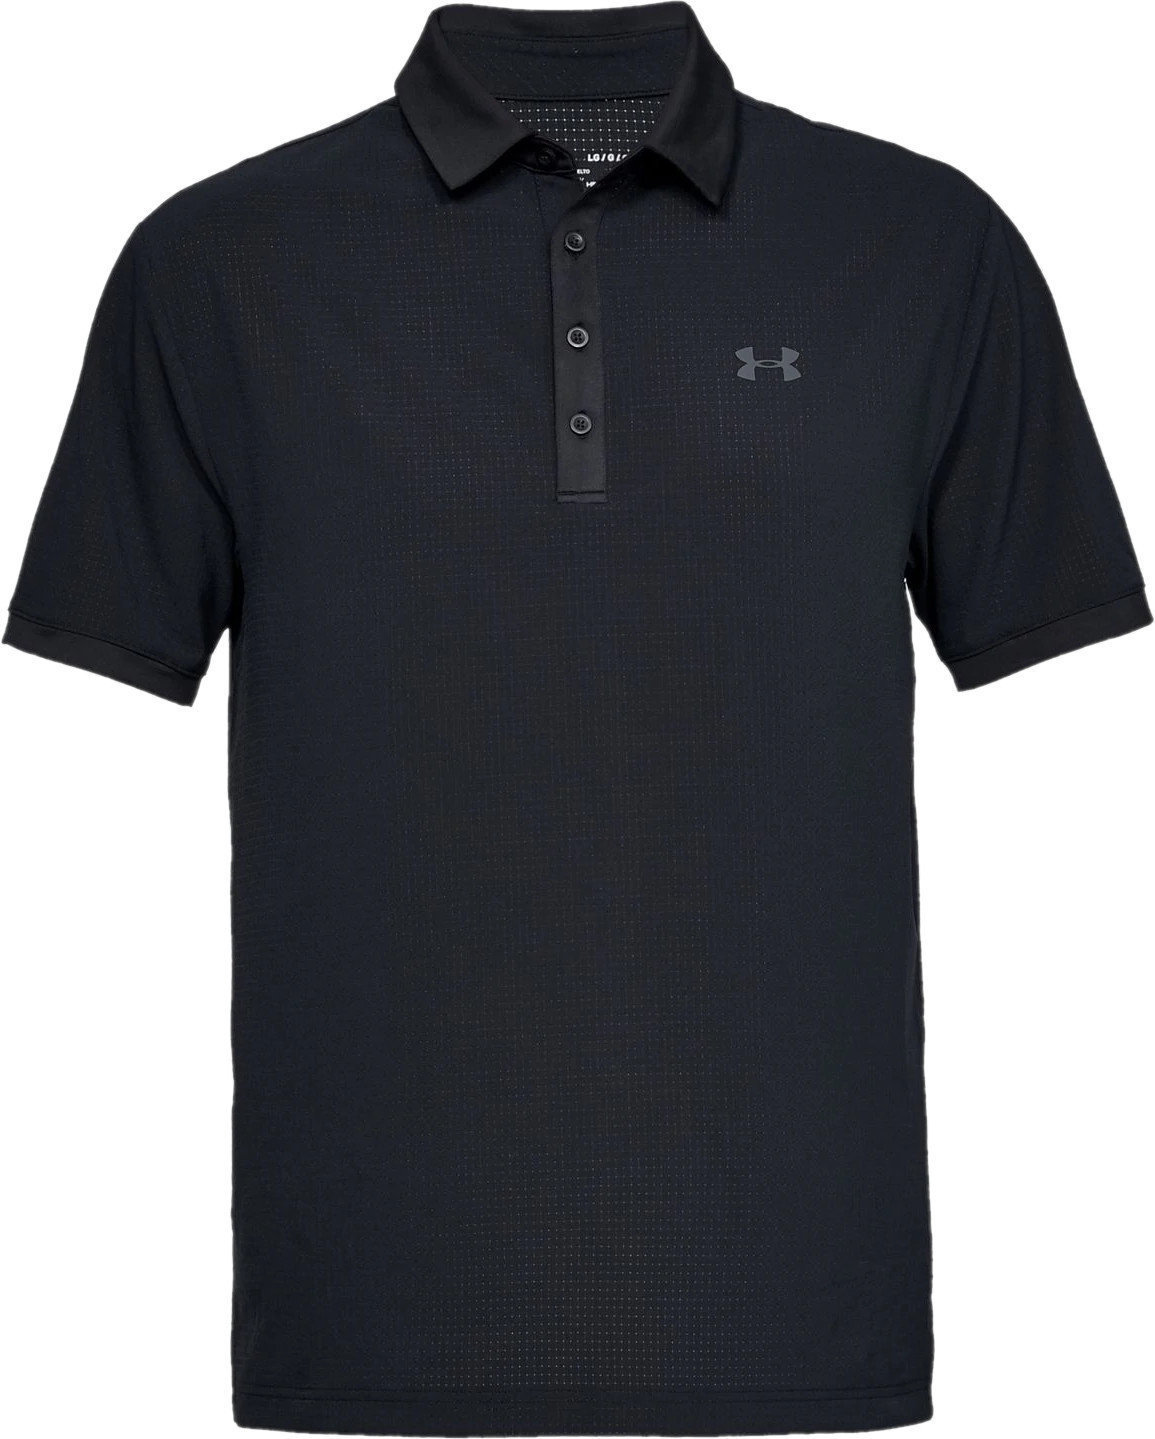 Poolopaita Under Armour Playoff Vented Musta L